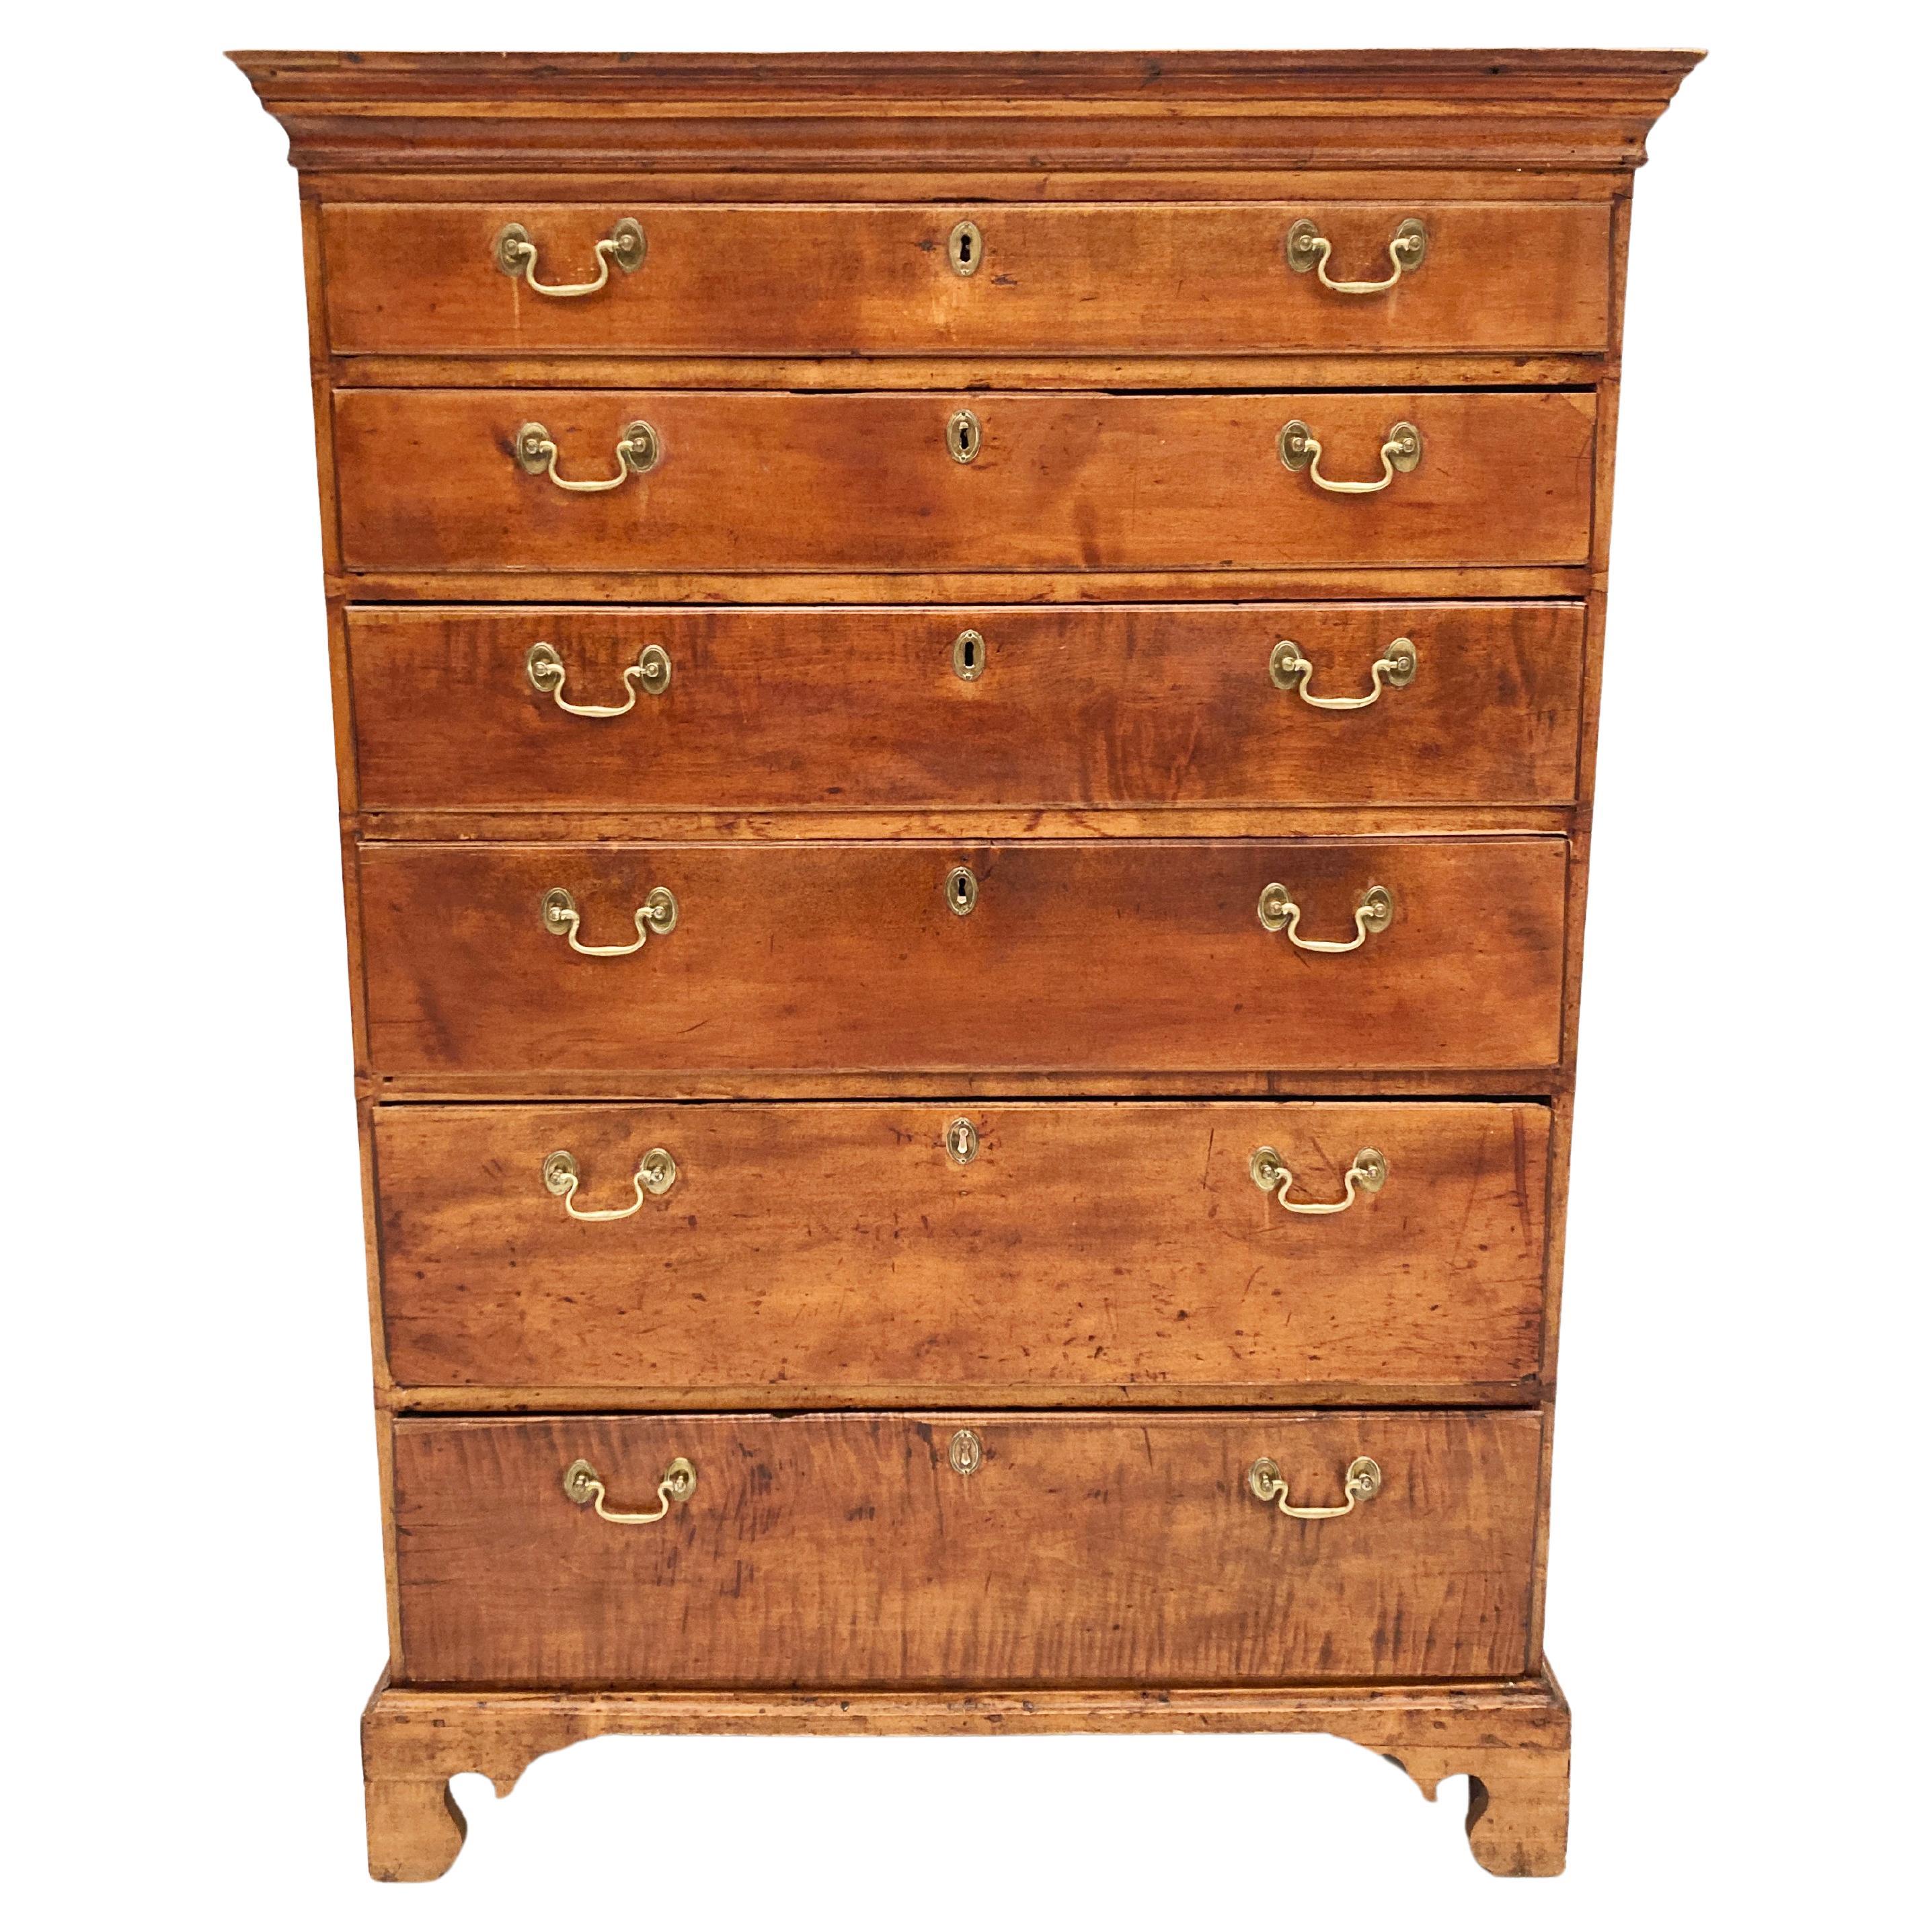 Early American 18th Century Chippendale Tiger Maple Tall Chest of Drawers For Sale